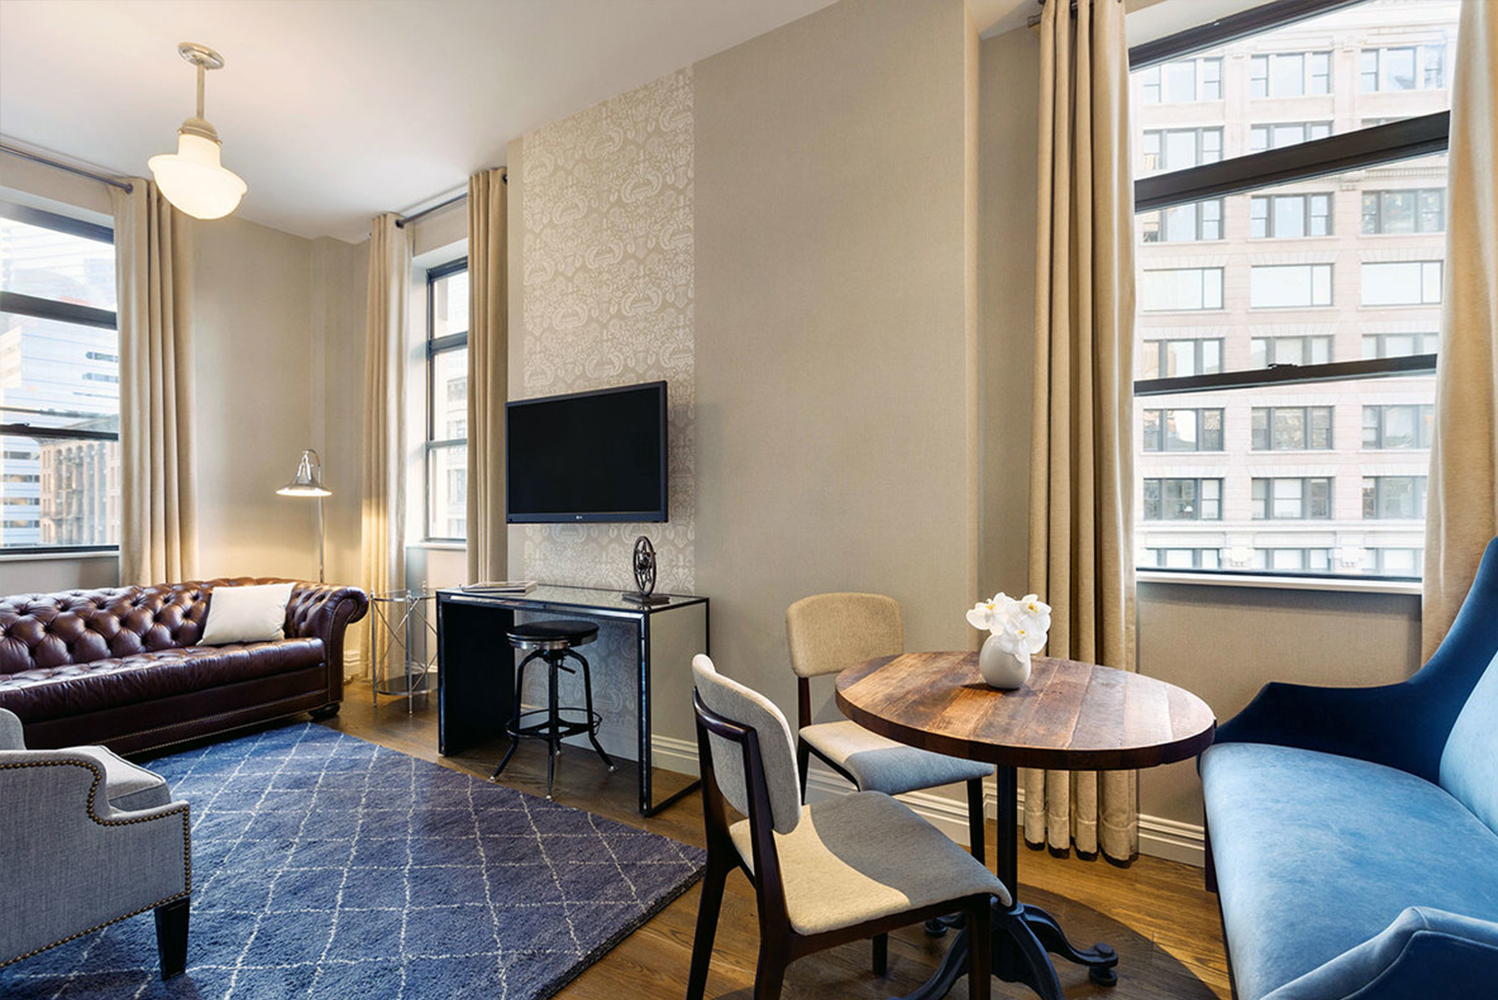 Triumph Hotels a collection of Manhattan hotels introduced the newly remodeled and reimagined Frederick Hotel in Tribeca